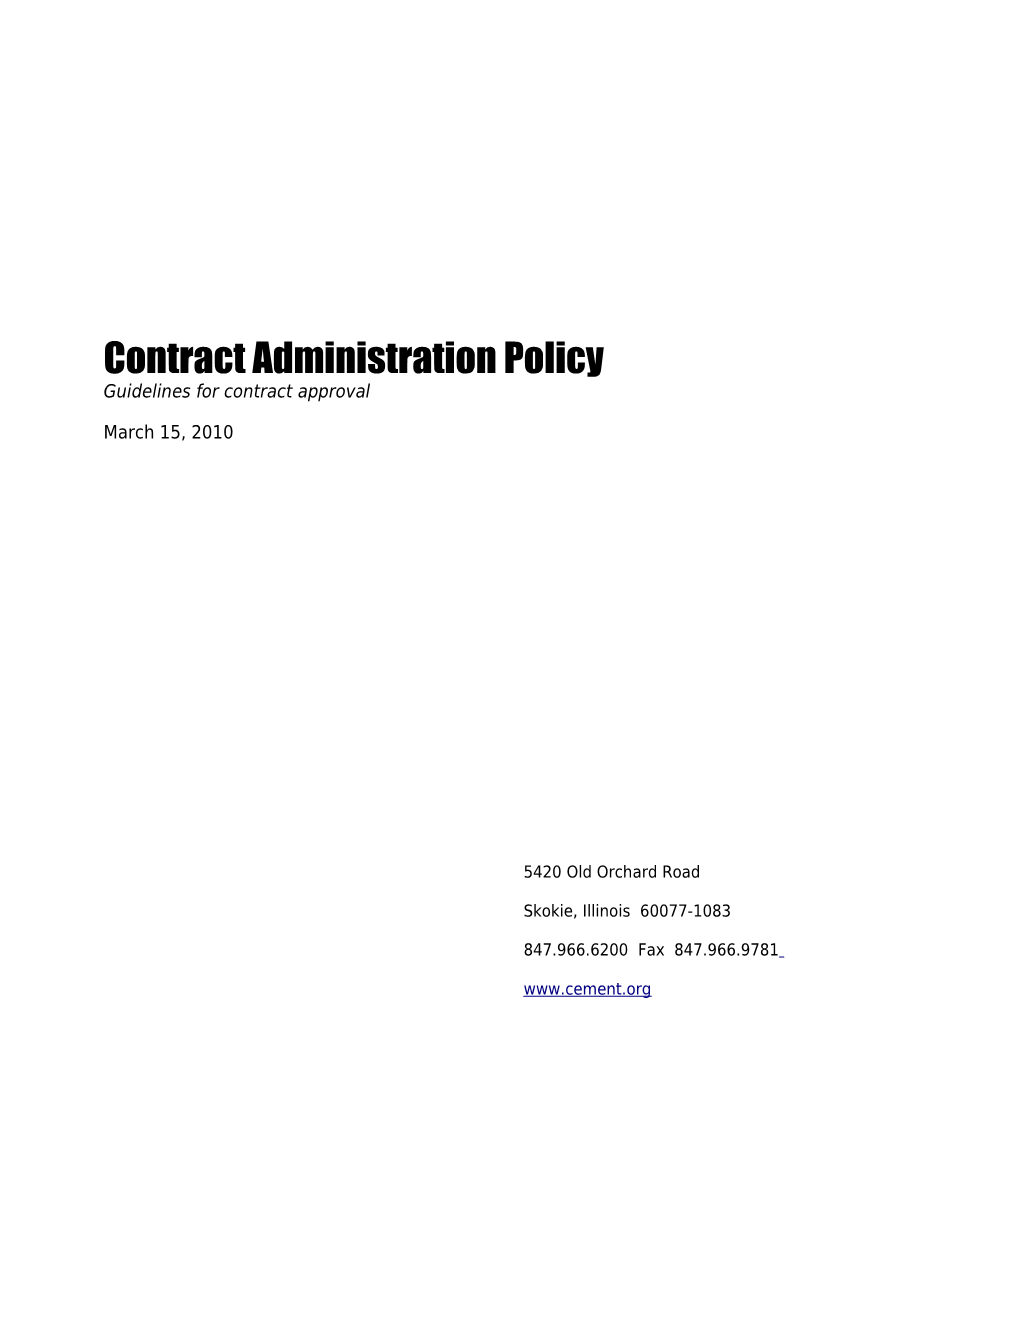 PCA Contract Administration Policy